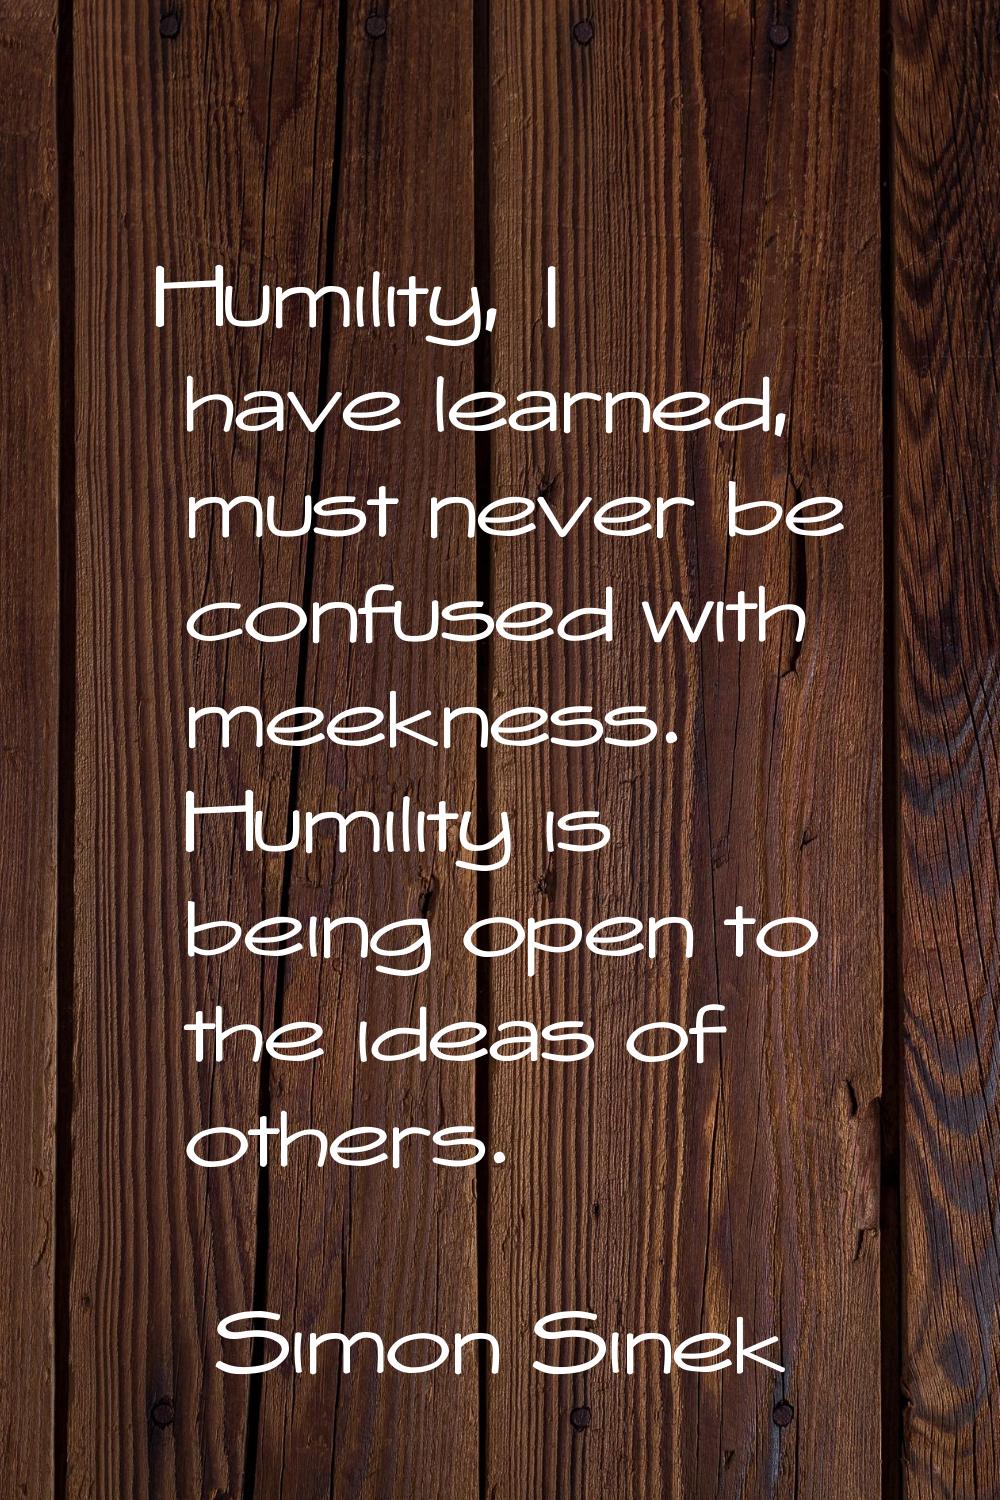 Humility, I have learned, must never be confused with meekness. Humility is being open to the ideas